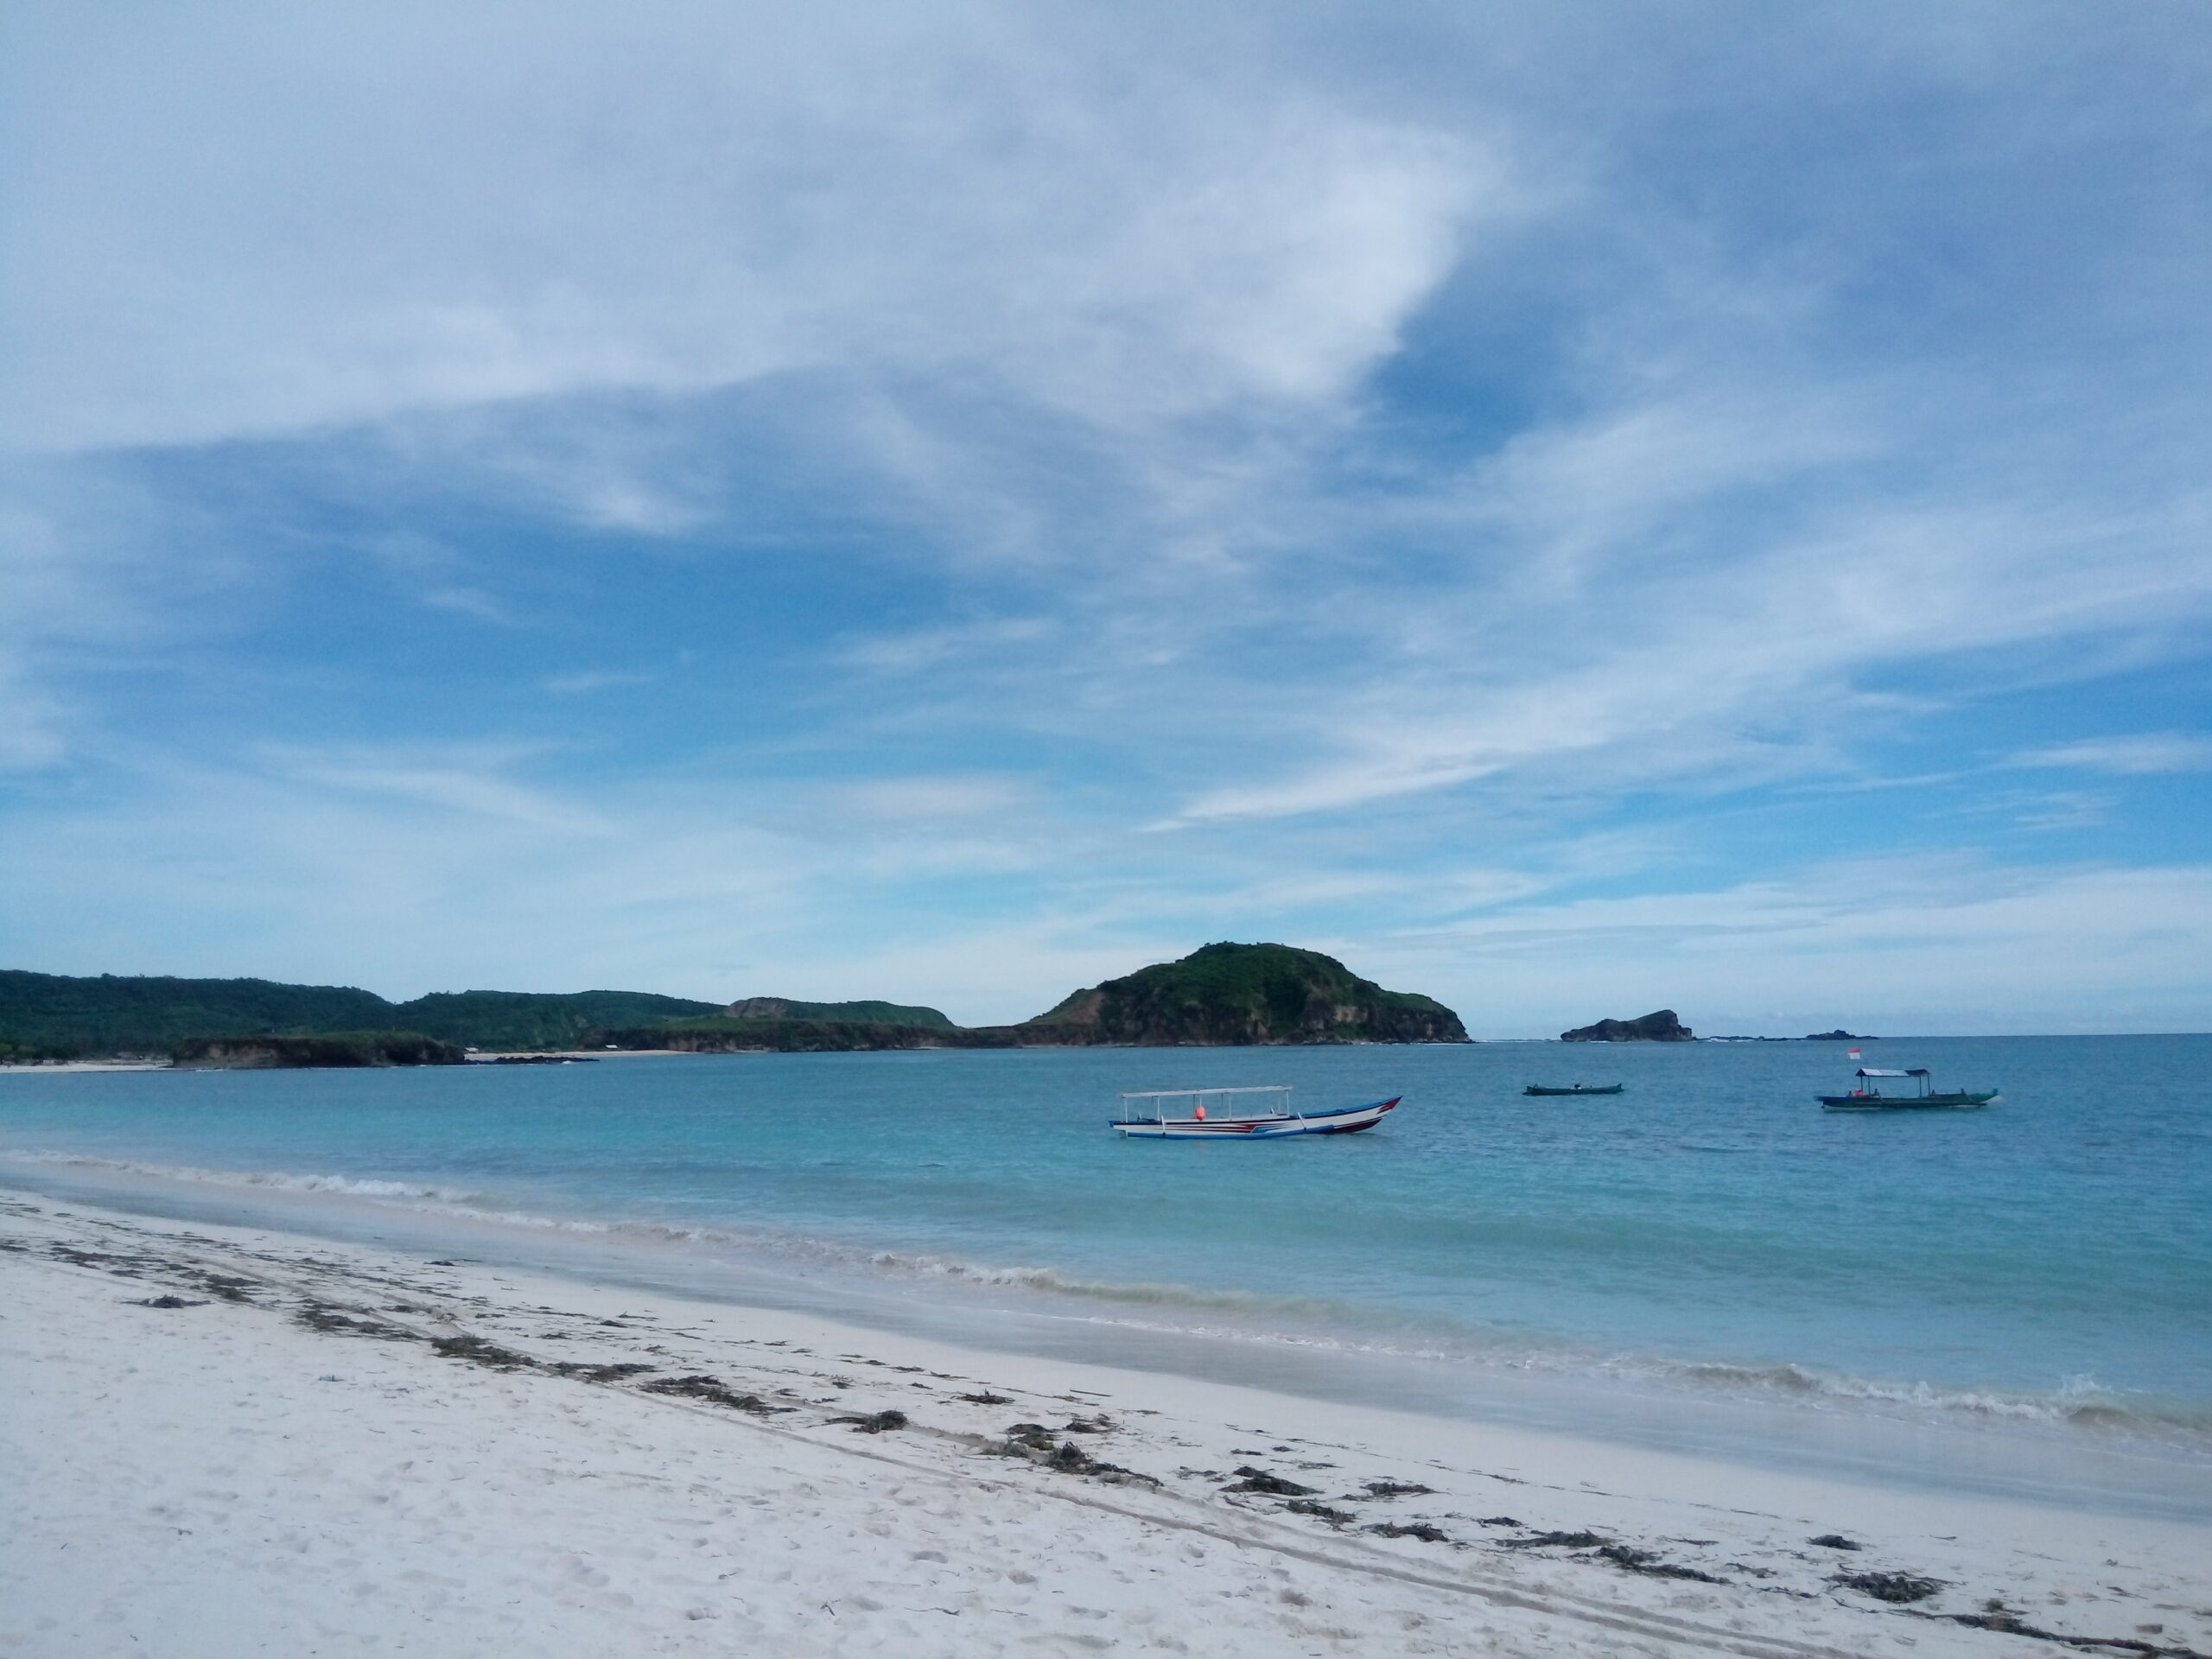 Tanjung Aan is a breathtaking sandy beach in Lombok, only 10 minutes from FabuLous Place Lombok surf villa